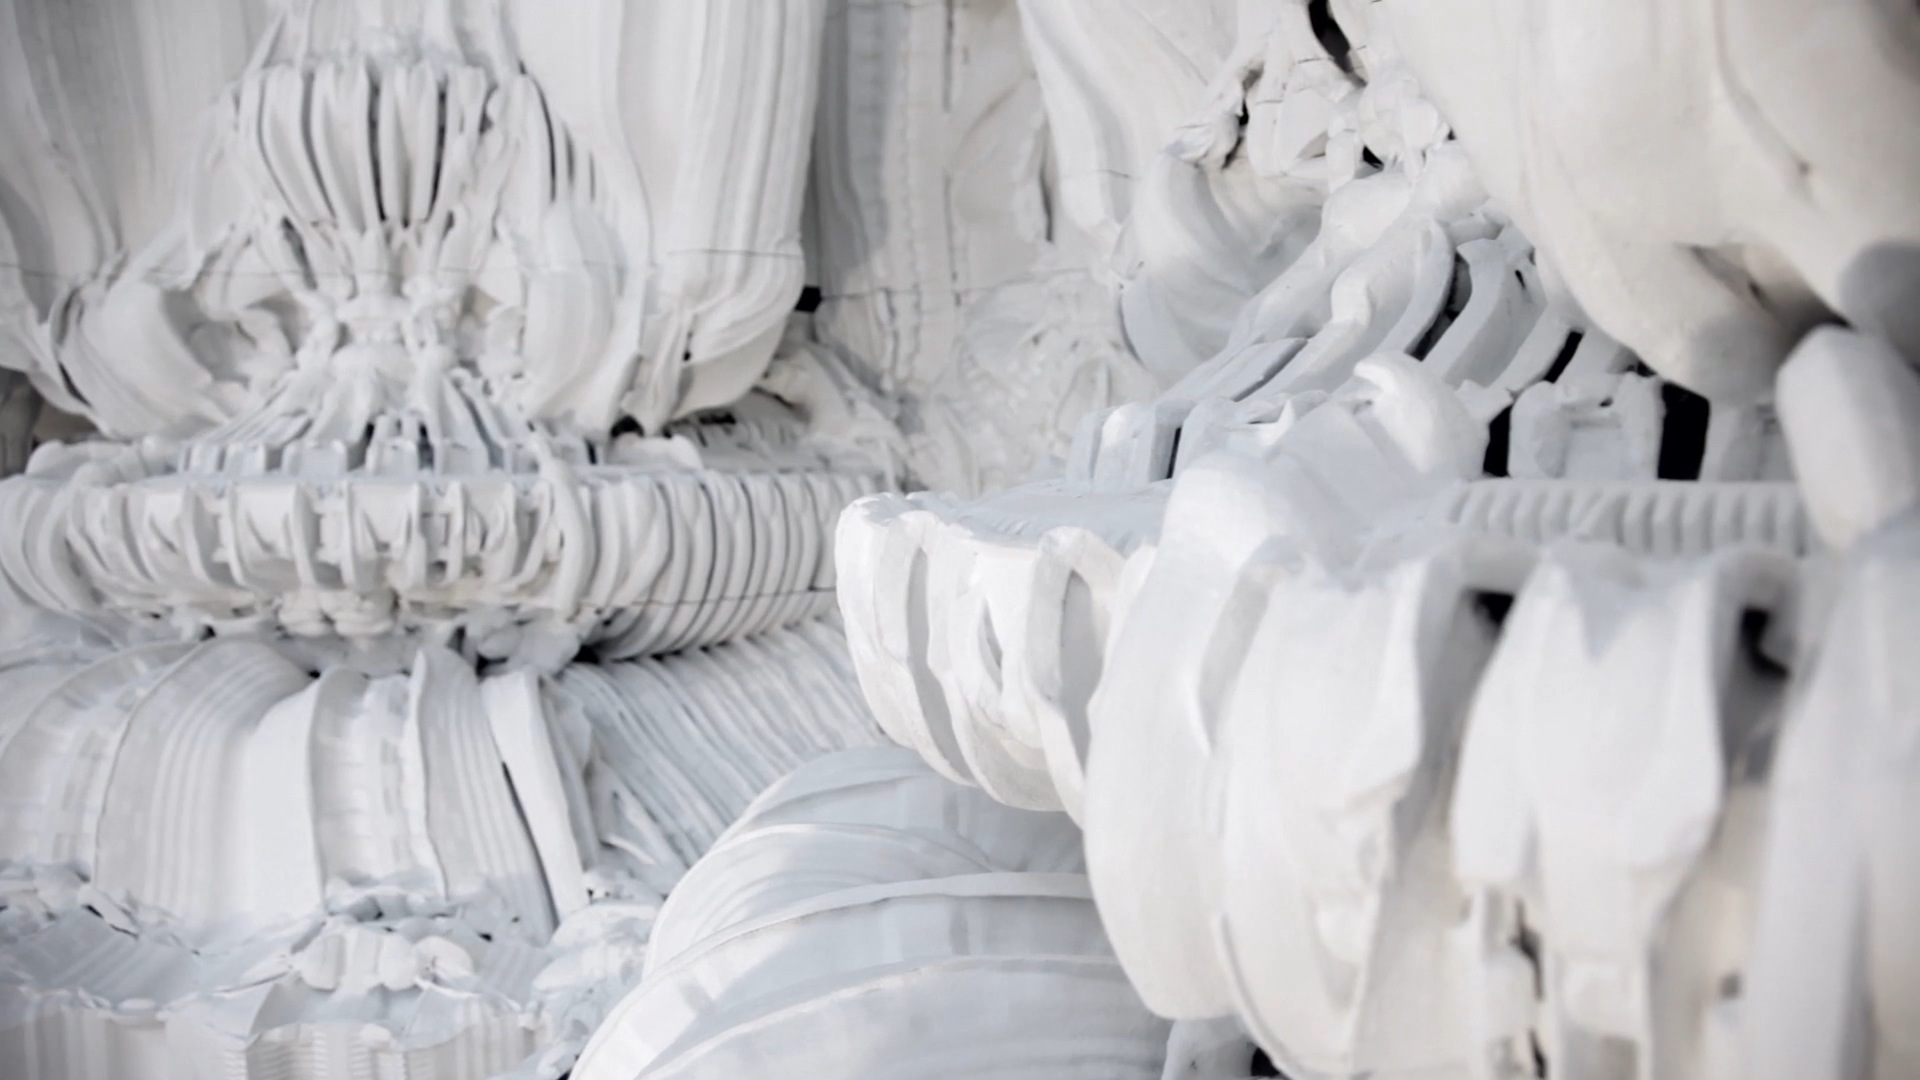 Digital Grotesque 3D Printing Architecture1